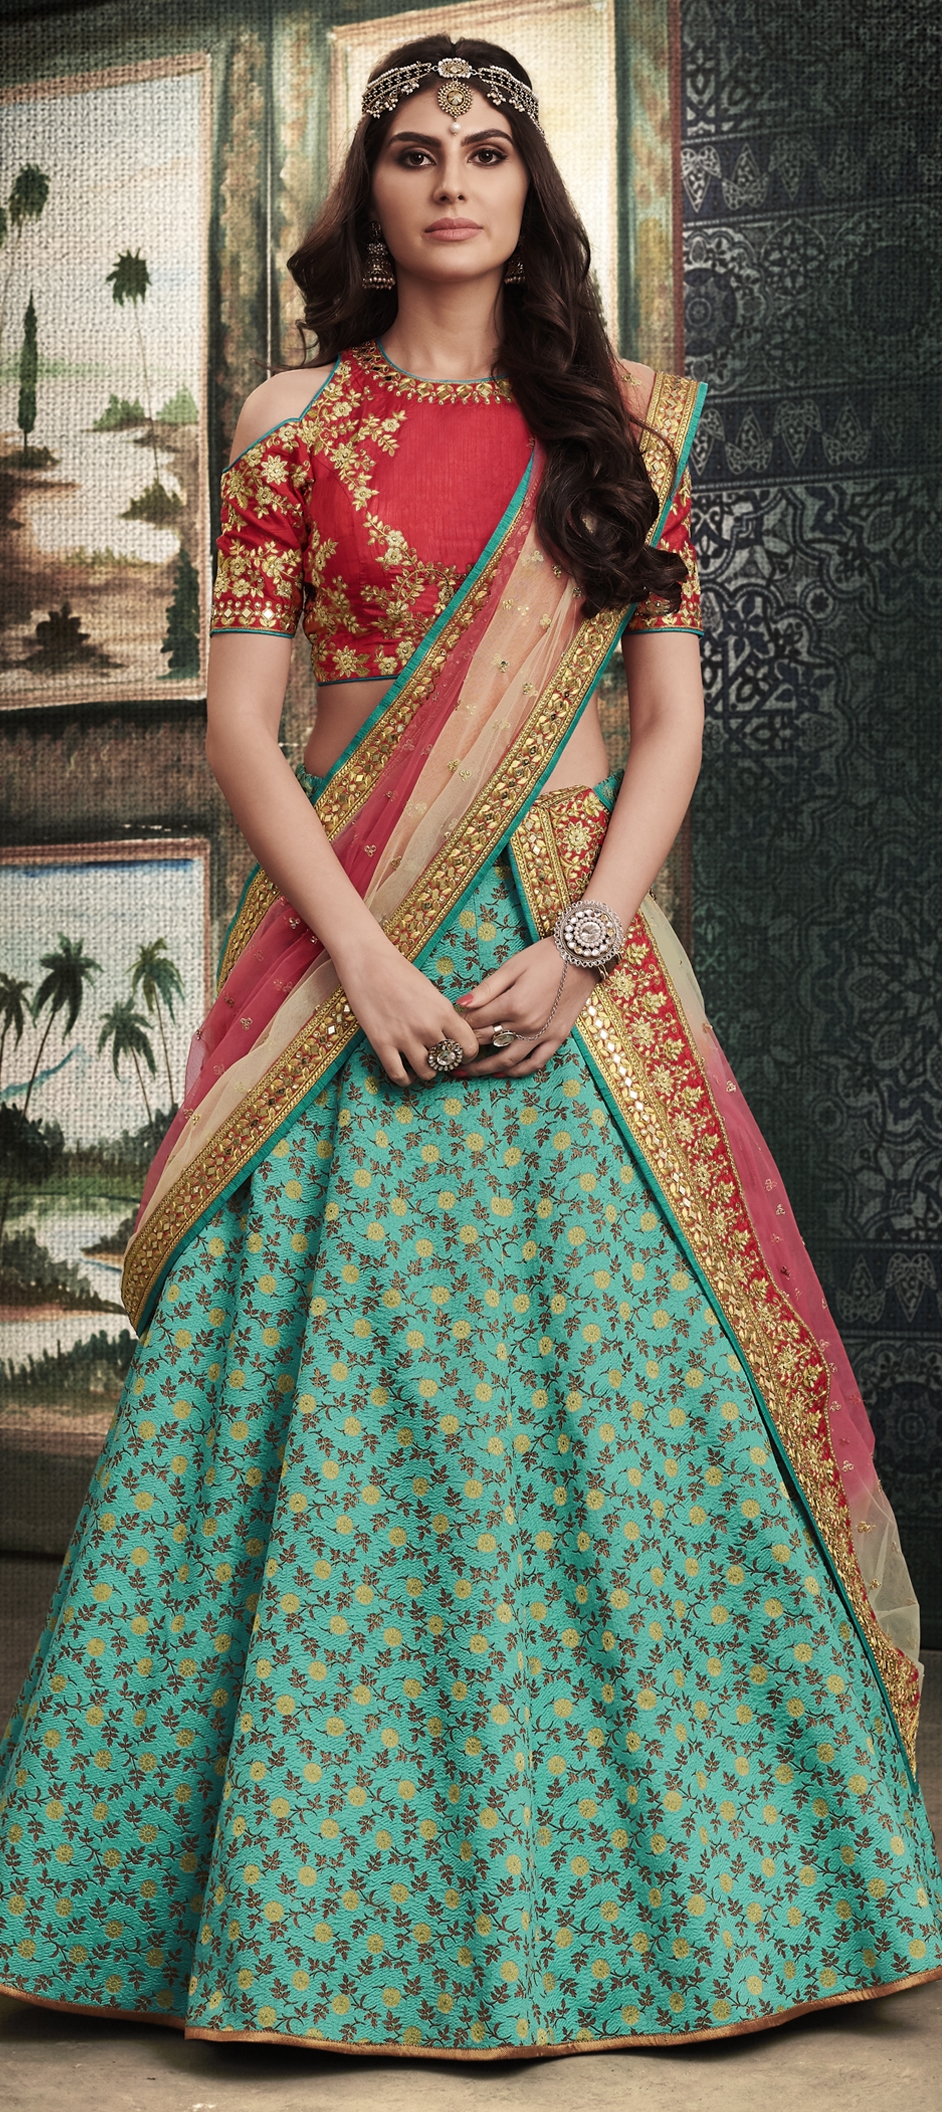 LOOKING FOR MEHENDI AND SANGEET LEHENGA – YOUR SEARCH ENDS HERE